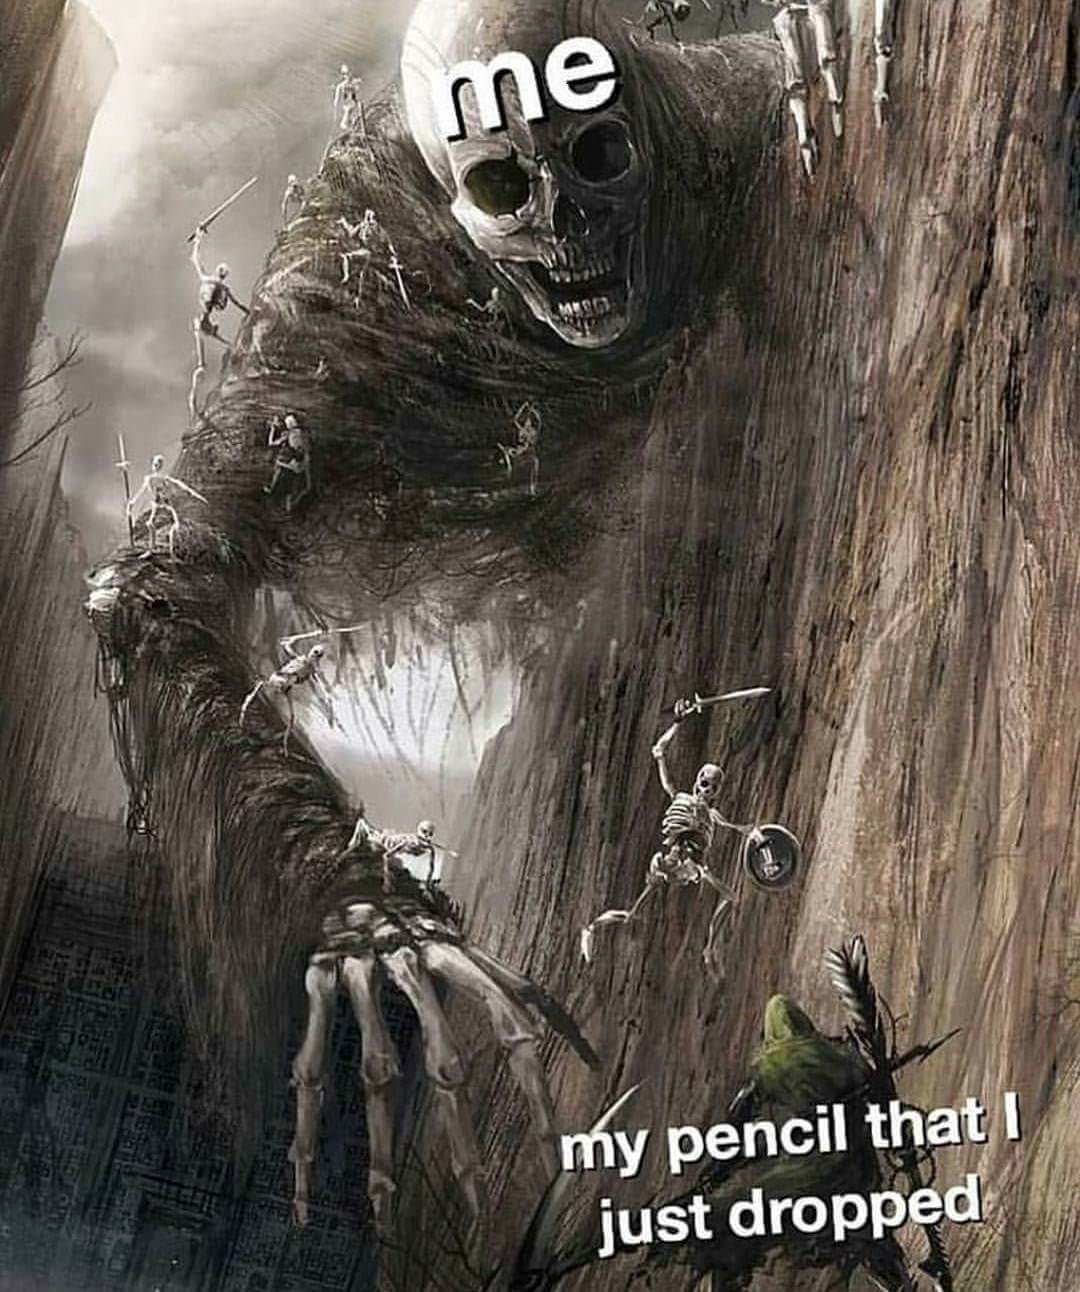 monster fantasy art - me my pencil that I just dropped